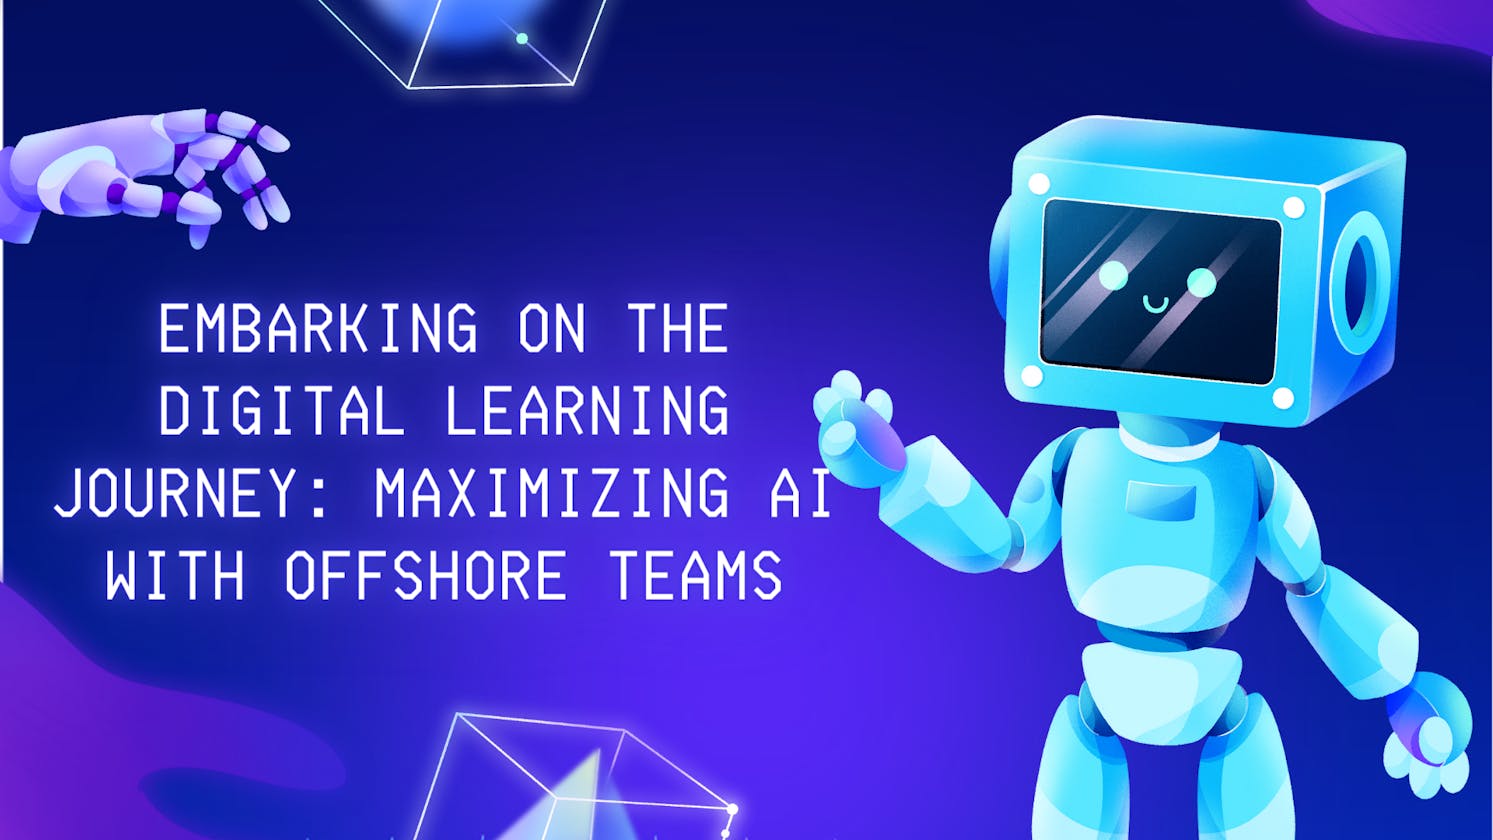 Embarking on the Digital Learning Journey: Maximizing AI with Offshore Teams